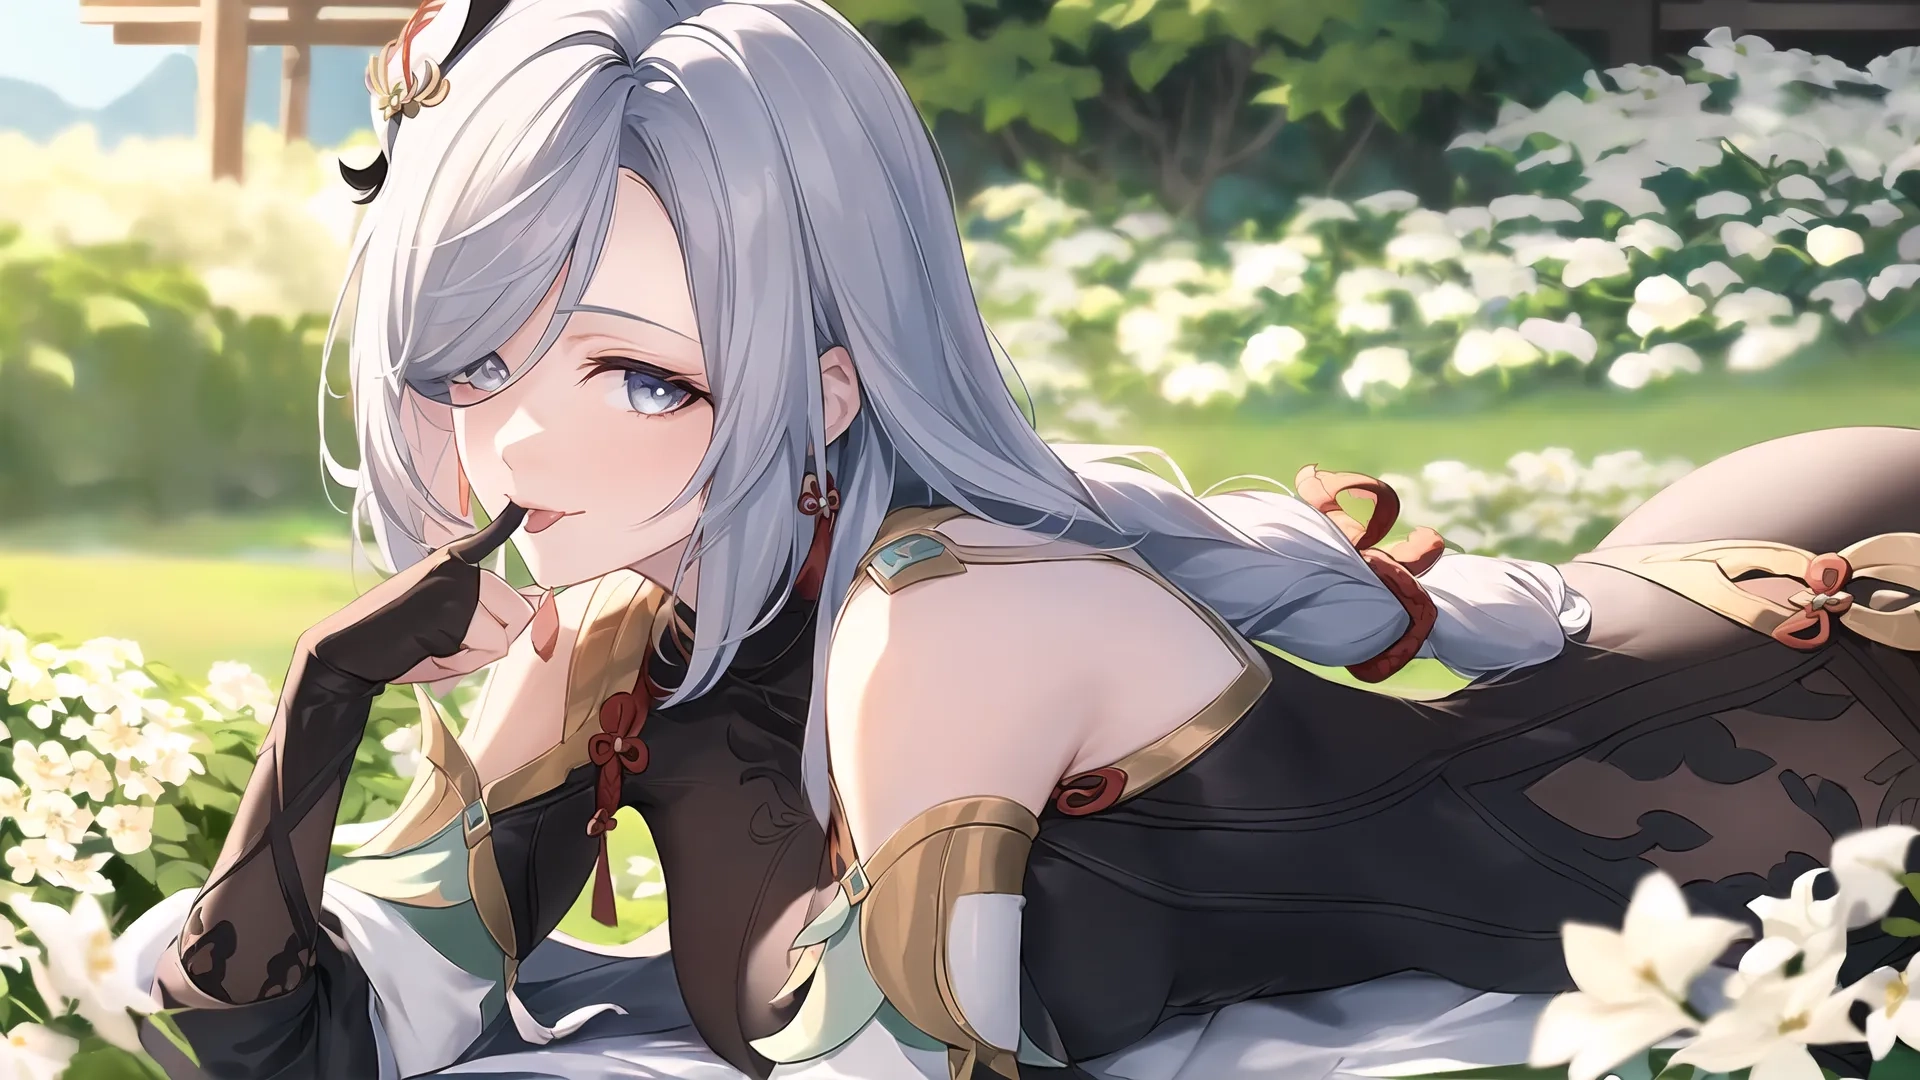 an anime with gray hair laying on the grass by some flowers on it the girl is leaning towards the camera, and she has her arm on its chin resting to her knee
